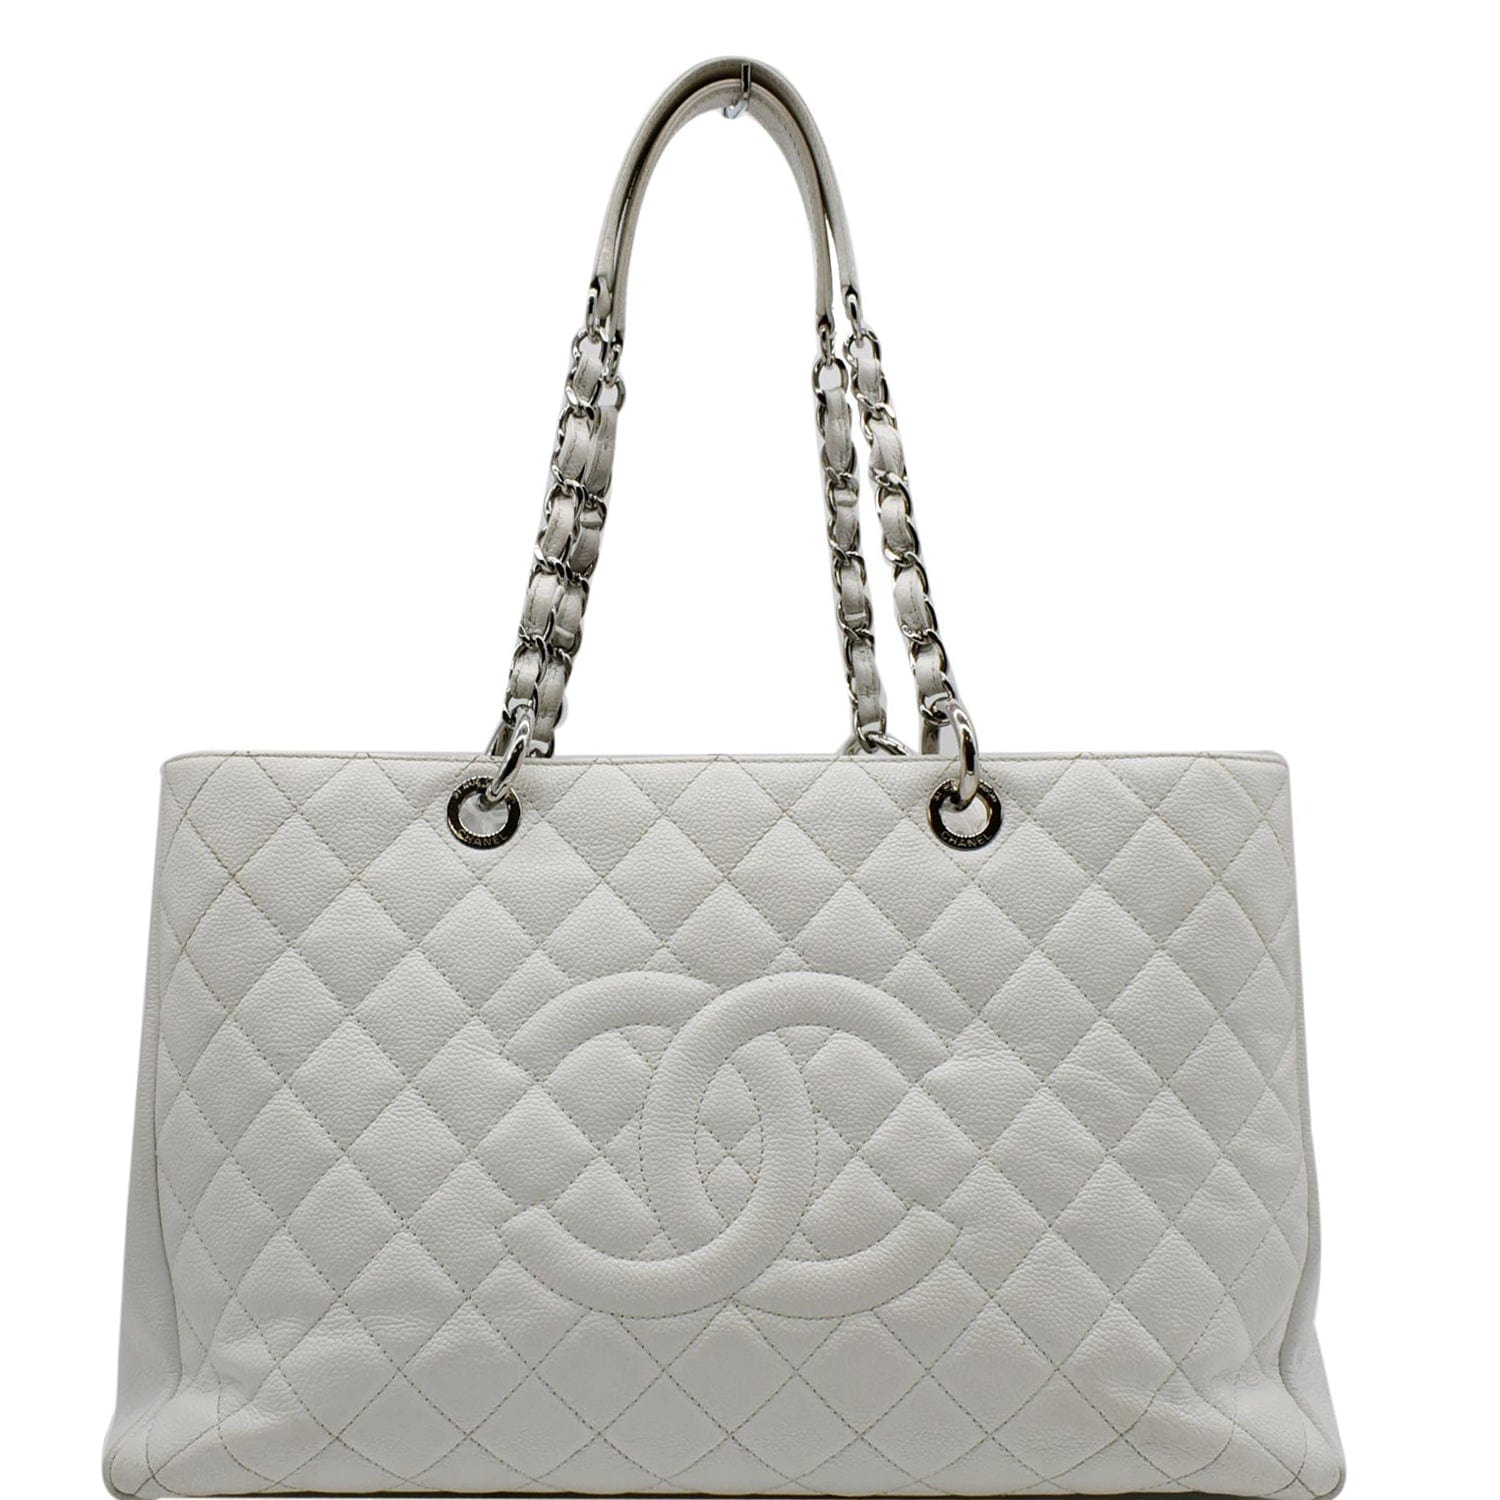 ødemark kontanter Inspiration CHANEL XL Grand Quilted Caviar Leather Shopping Tote Bag White- 15% OF